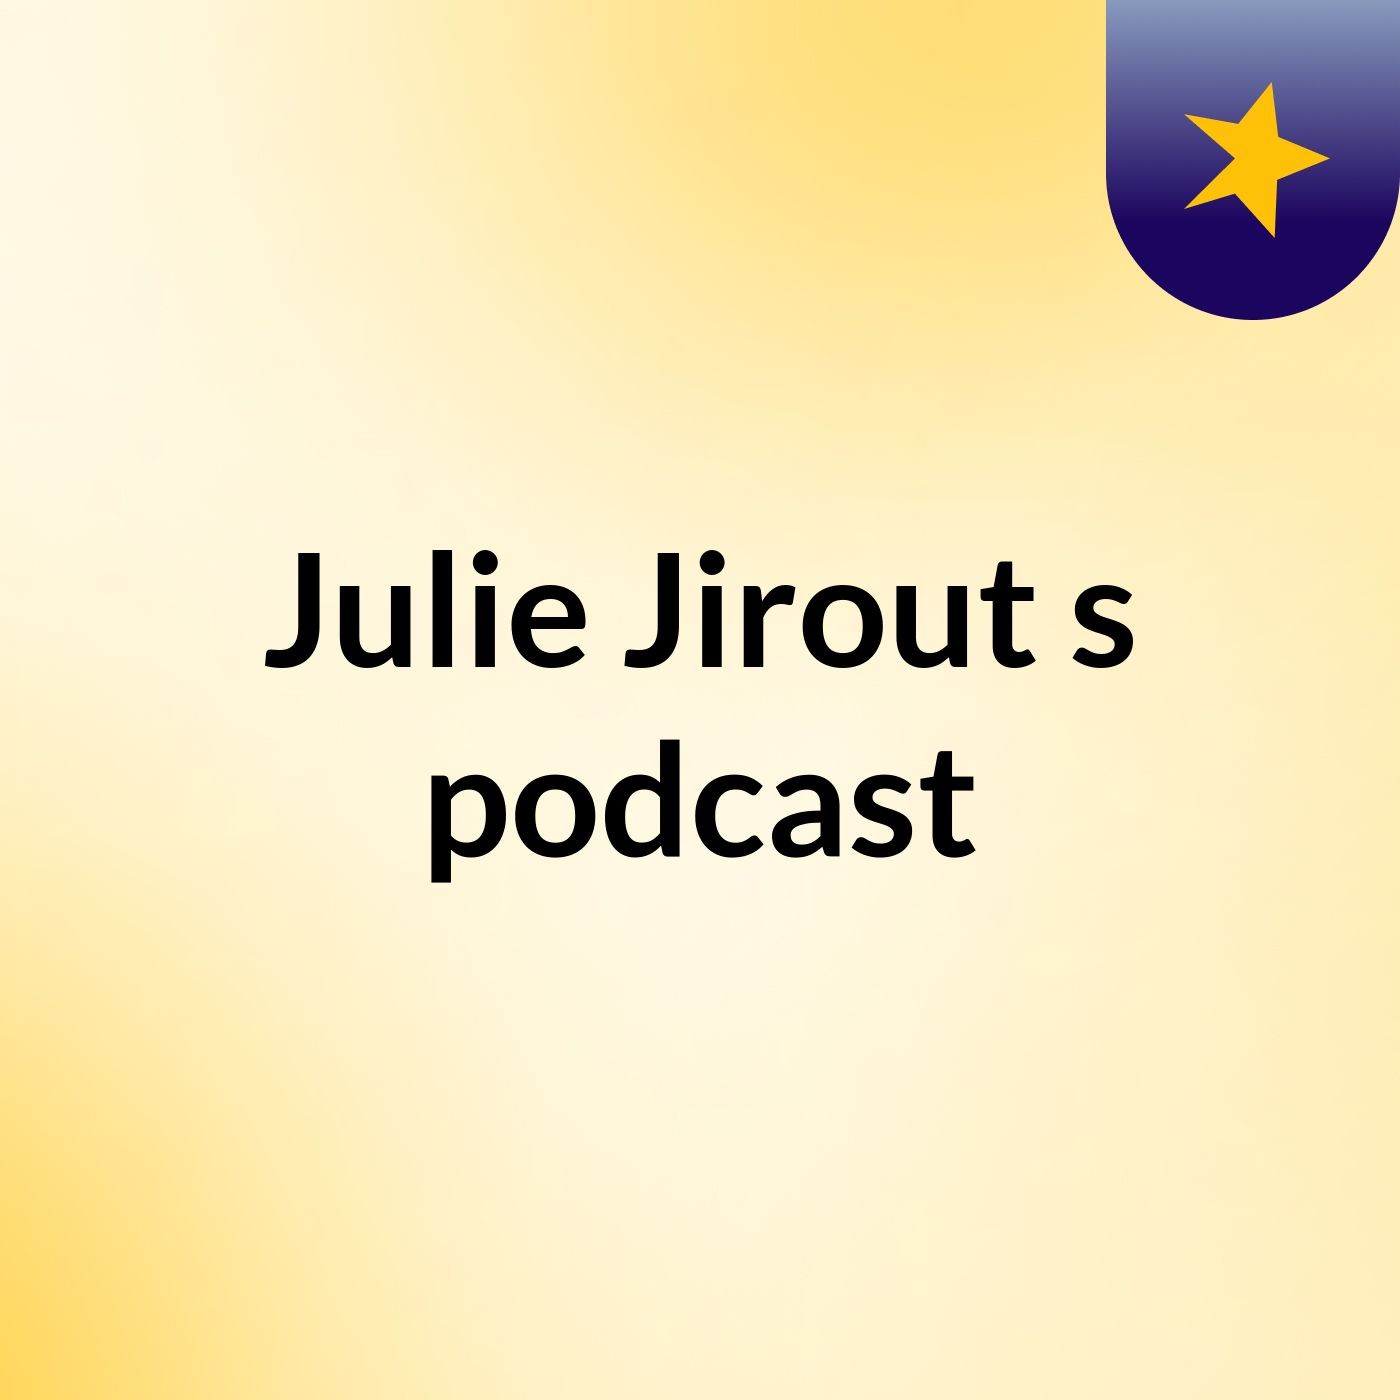 Julie Jirout's podcast